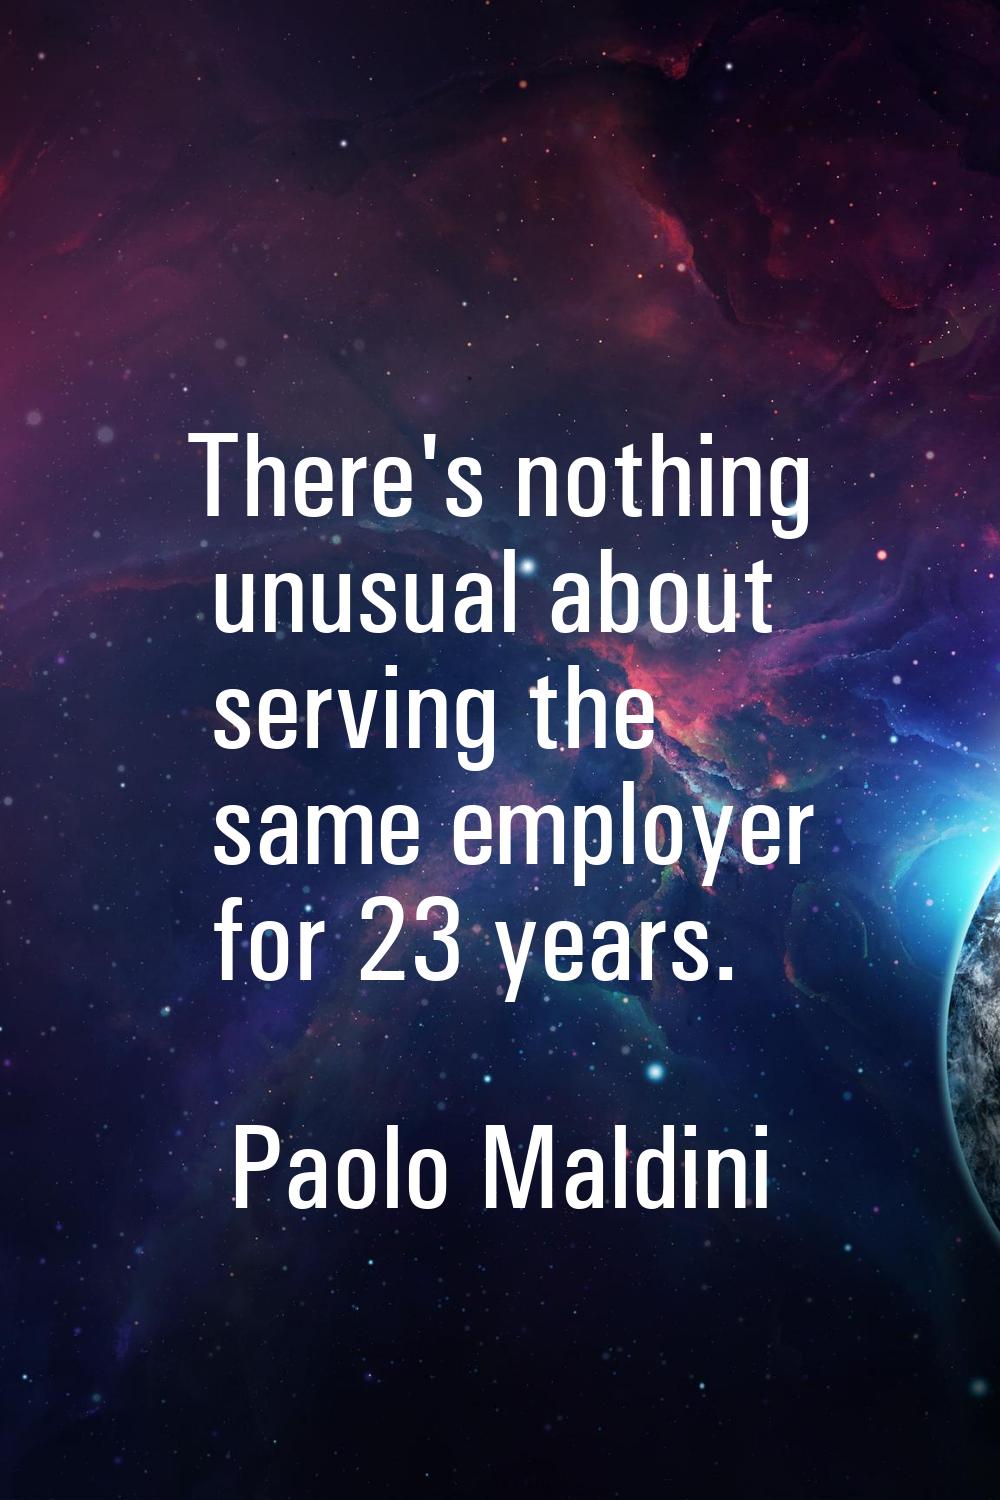 There's nothing unusual about serving the same employer for 23 years.